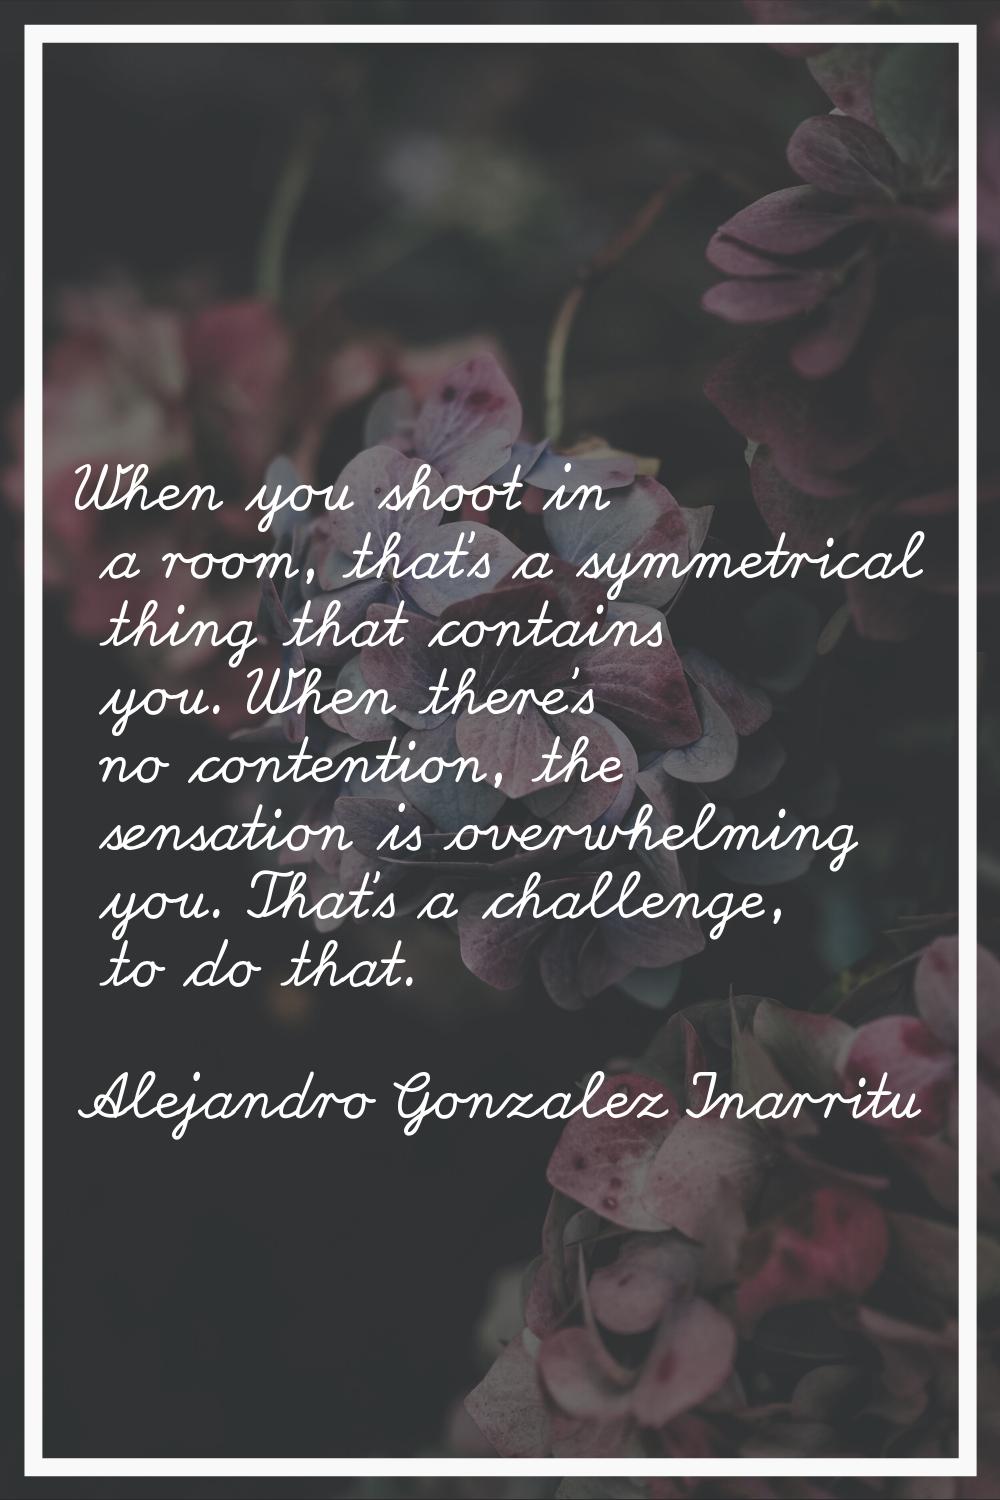 When you shoot in a room, that's a symmetrical thing that contains you. When there's no contention,